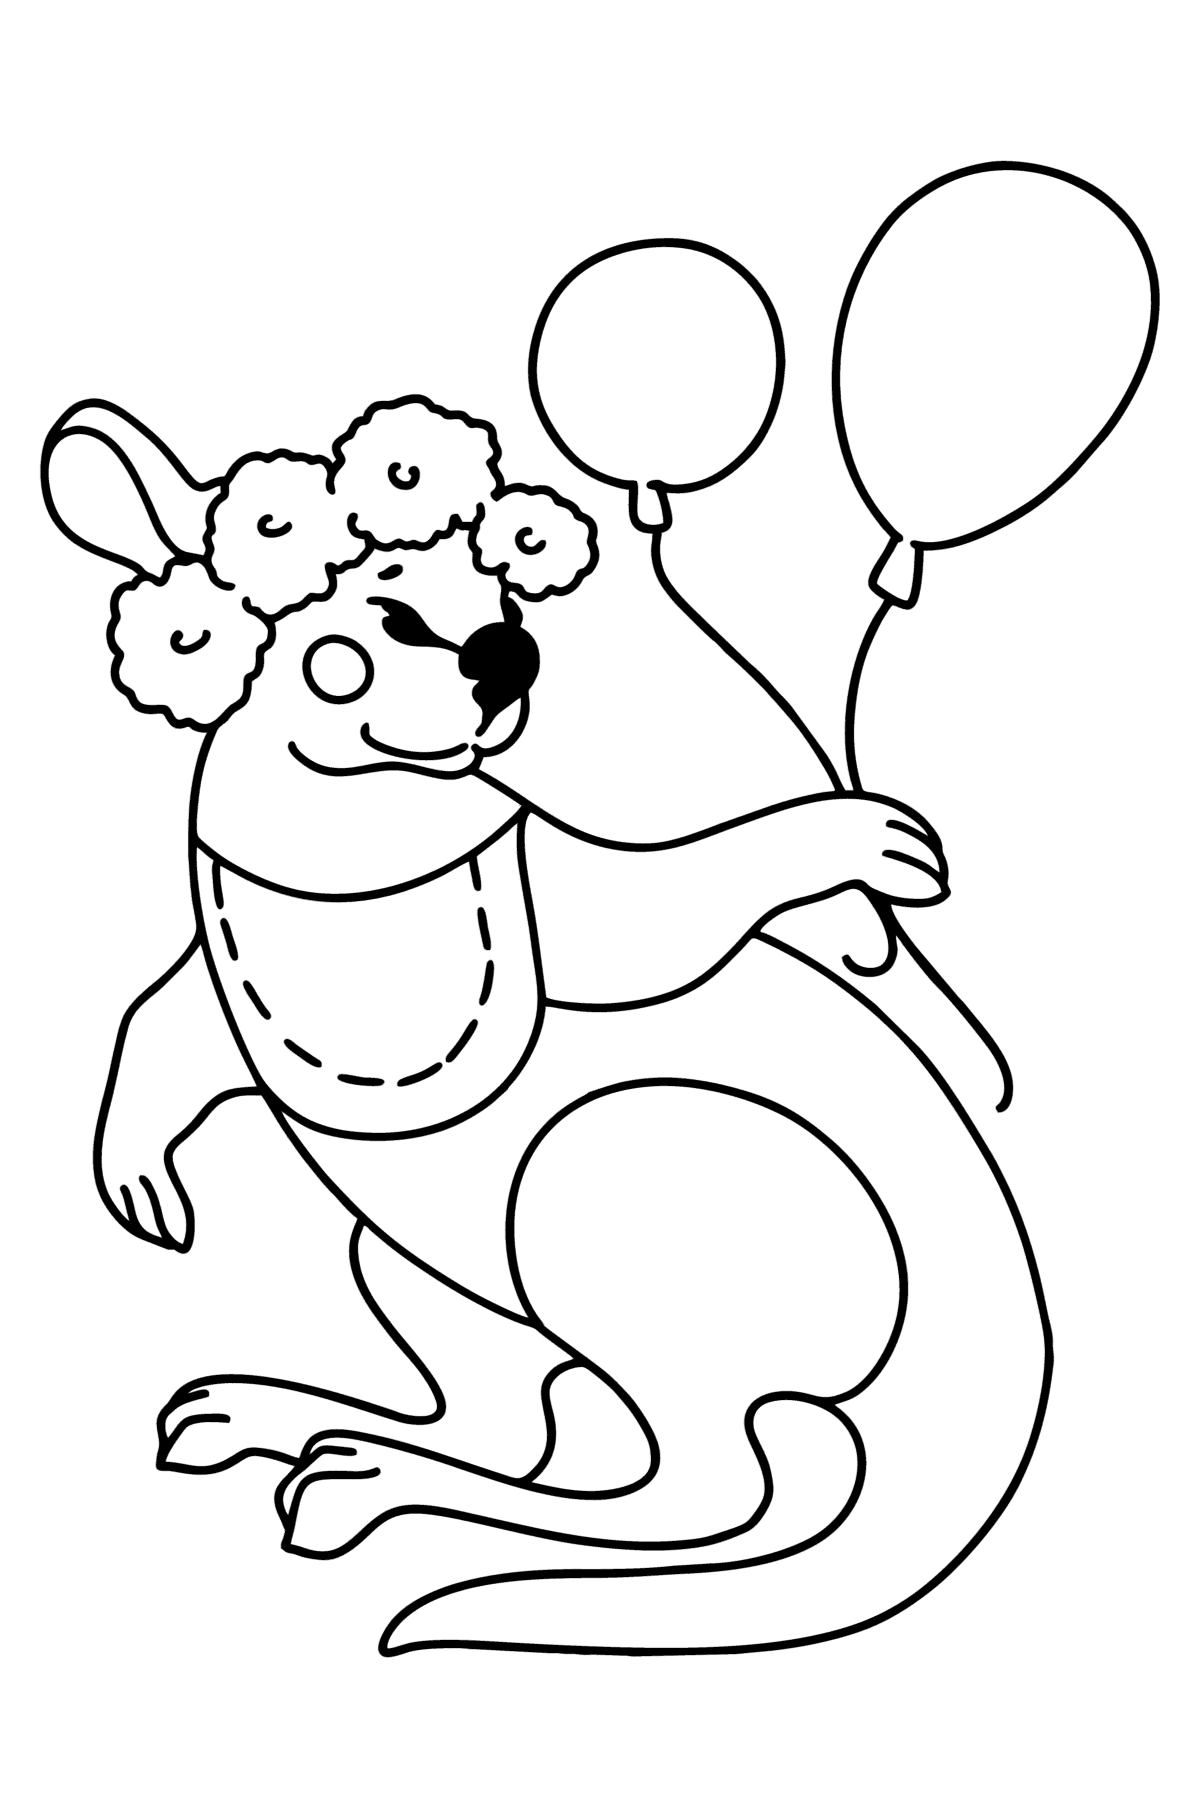 Beautiful Coloring page - Cartoon Baby Kangaroo - Coloring Pages for Kids